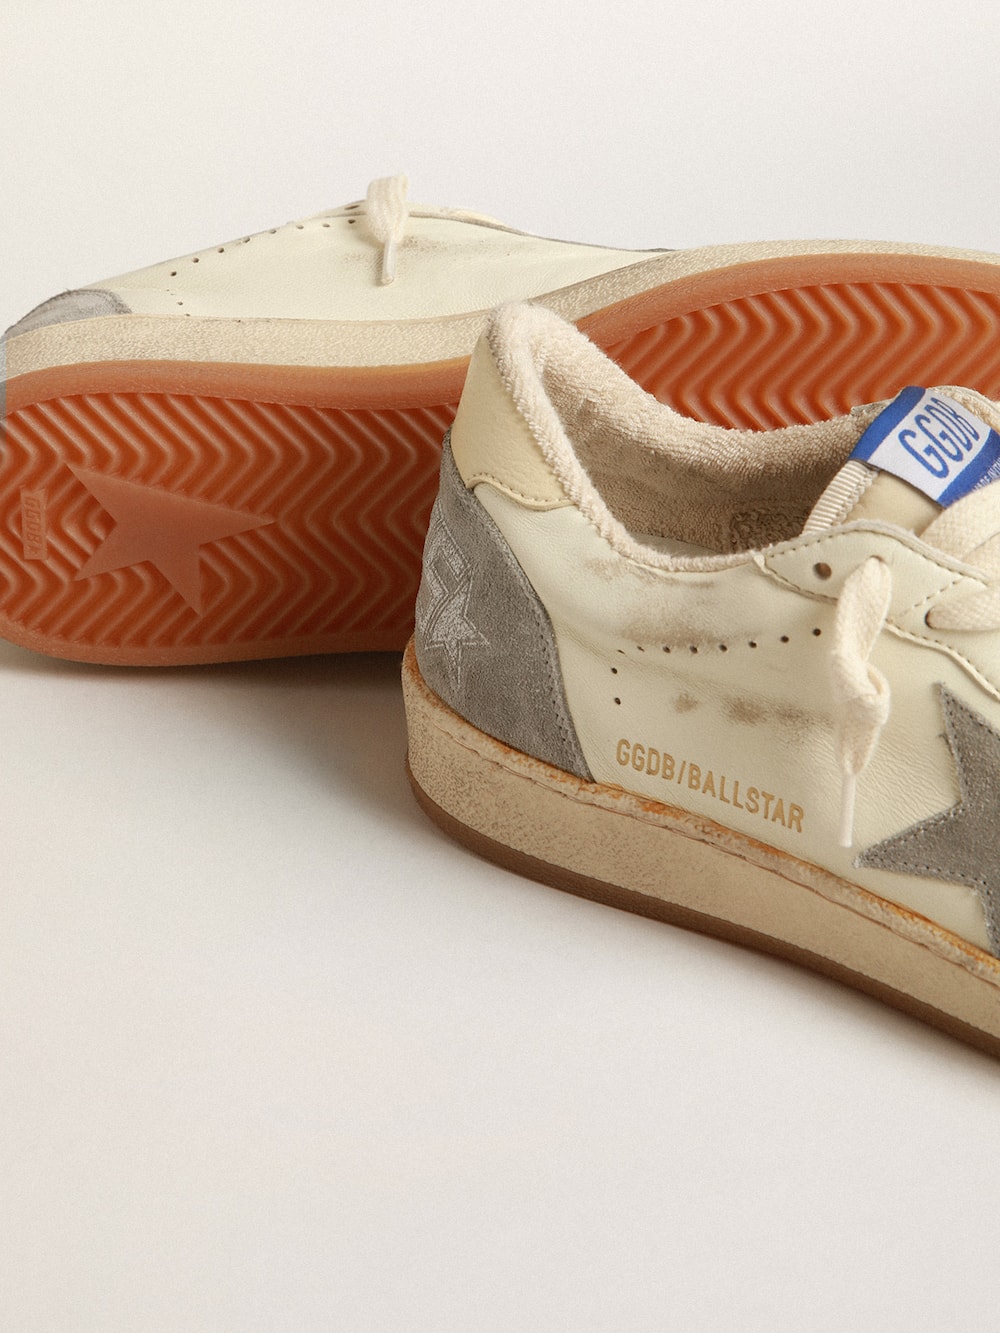 Golden Goose - Ball Star in nappa leather with gray suede star and beige heel tab in 